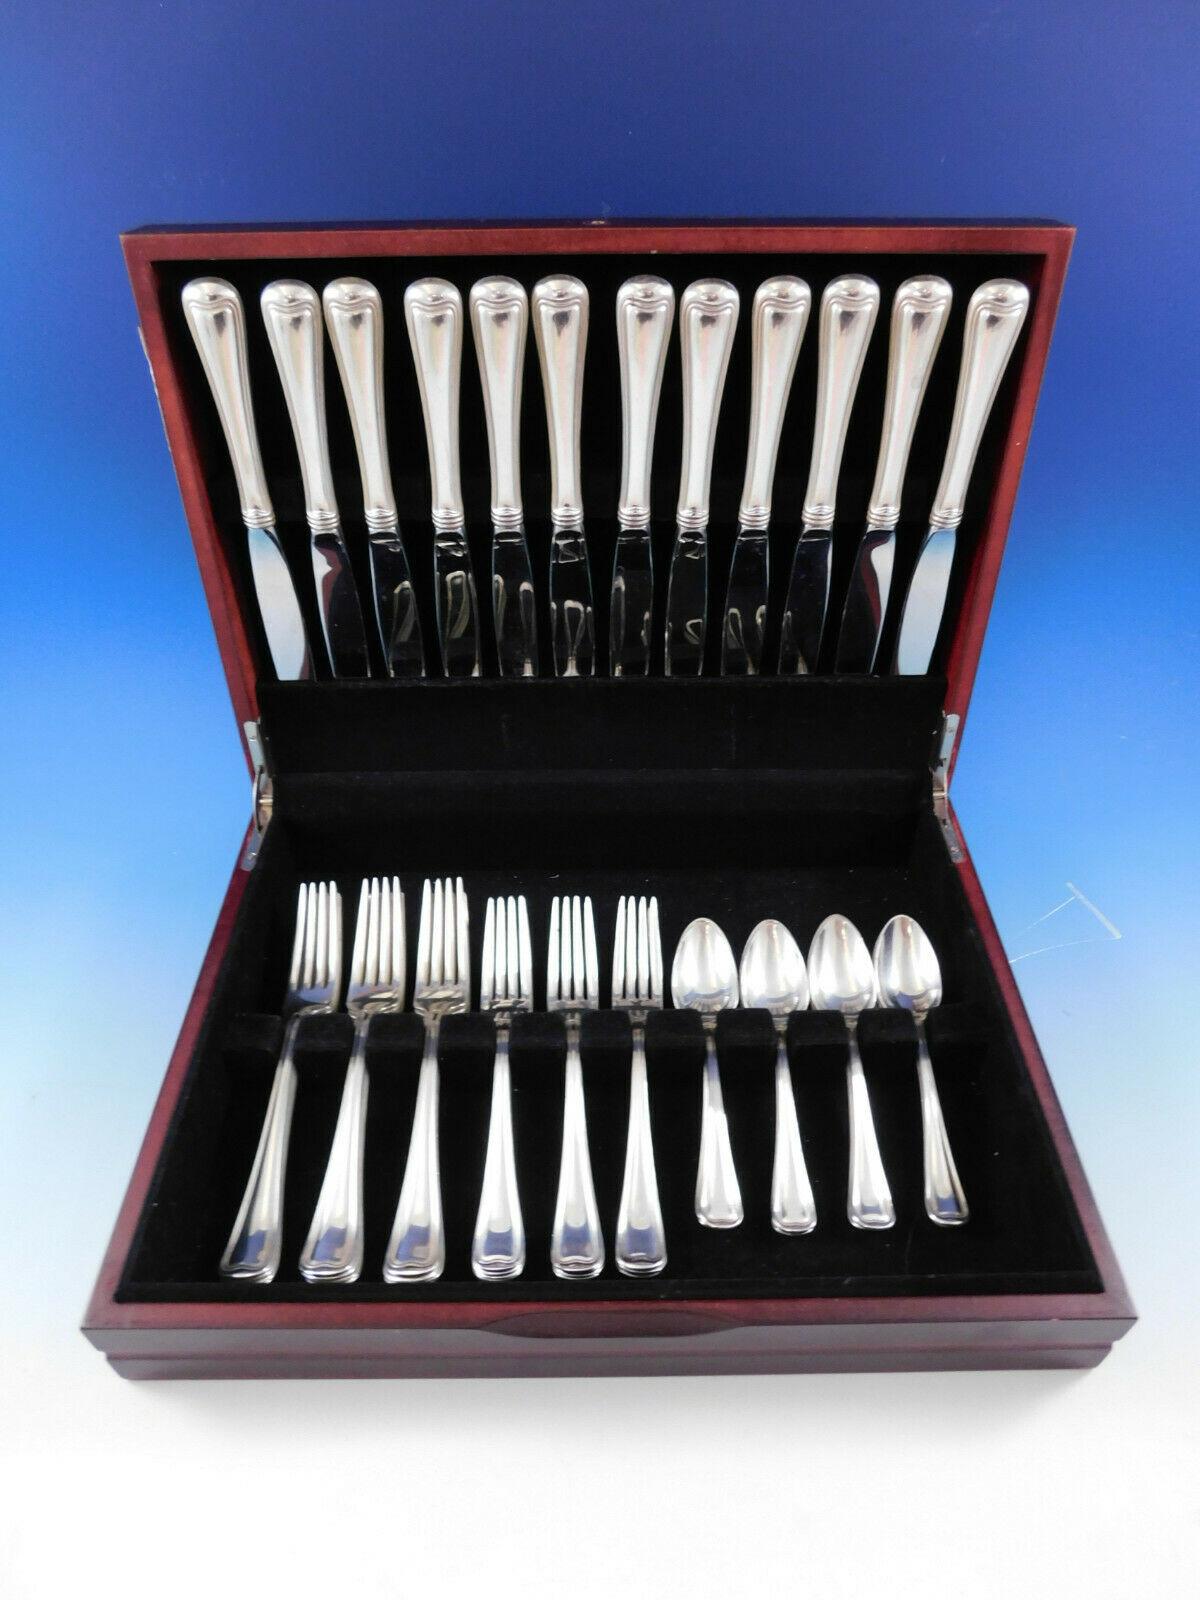 Dinner size Old French by Gorham sterling silver Flatware set, 48 pieces. This set includes:
Reminiscent of Parisian cafes, the clean lines and simple styling of this Classic pattern add a fresh accent to any table décor. First introduced in 1905,